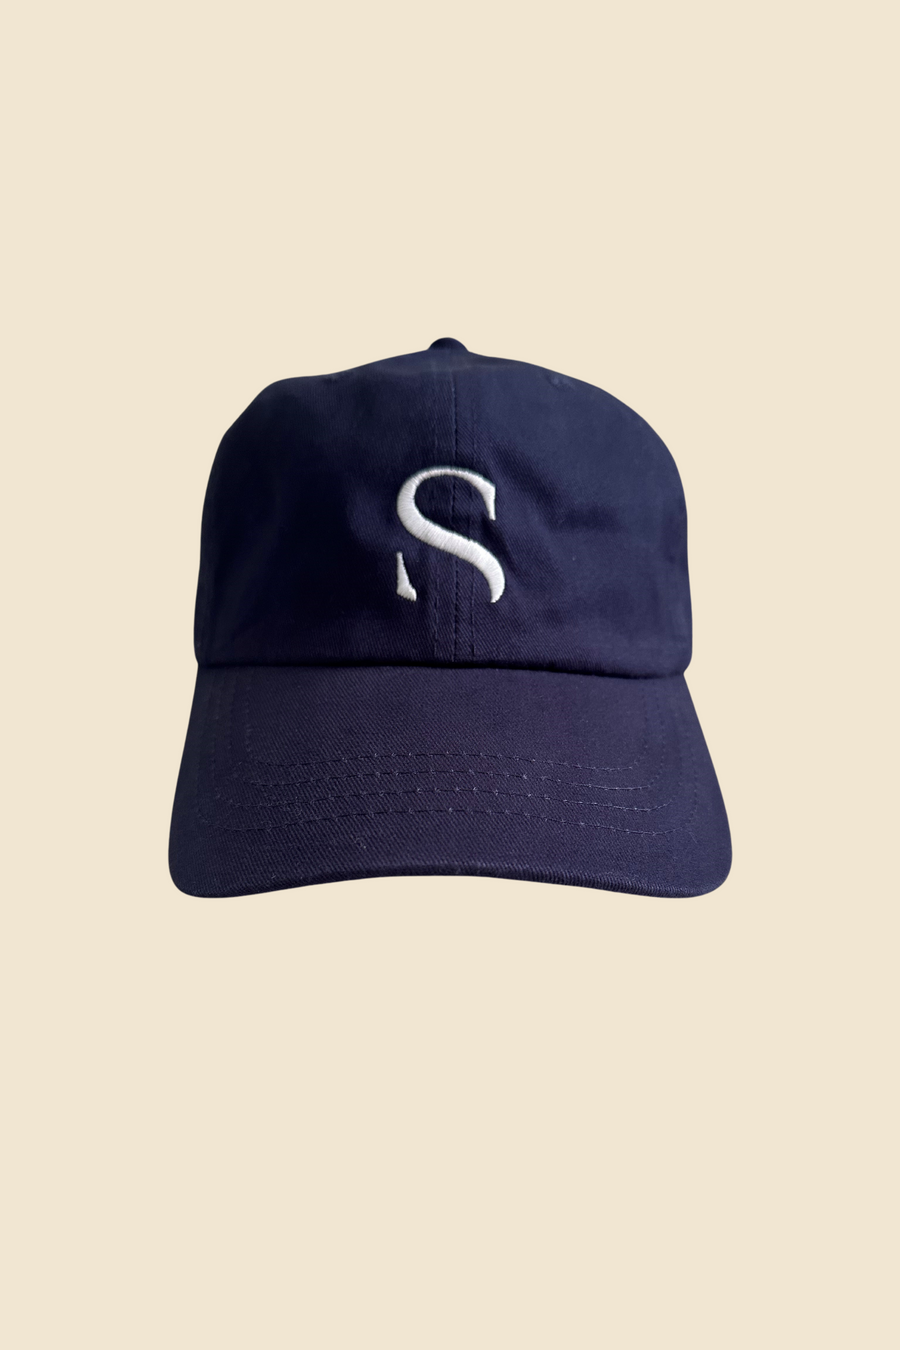 Sitano's Merch with a Mission Baseball Cap